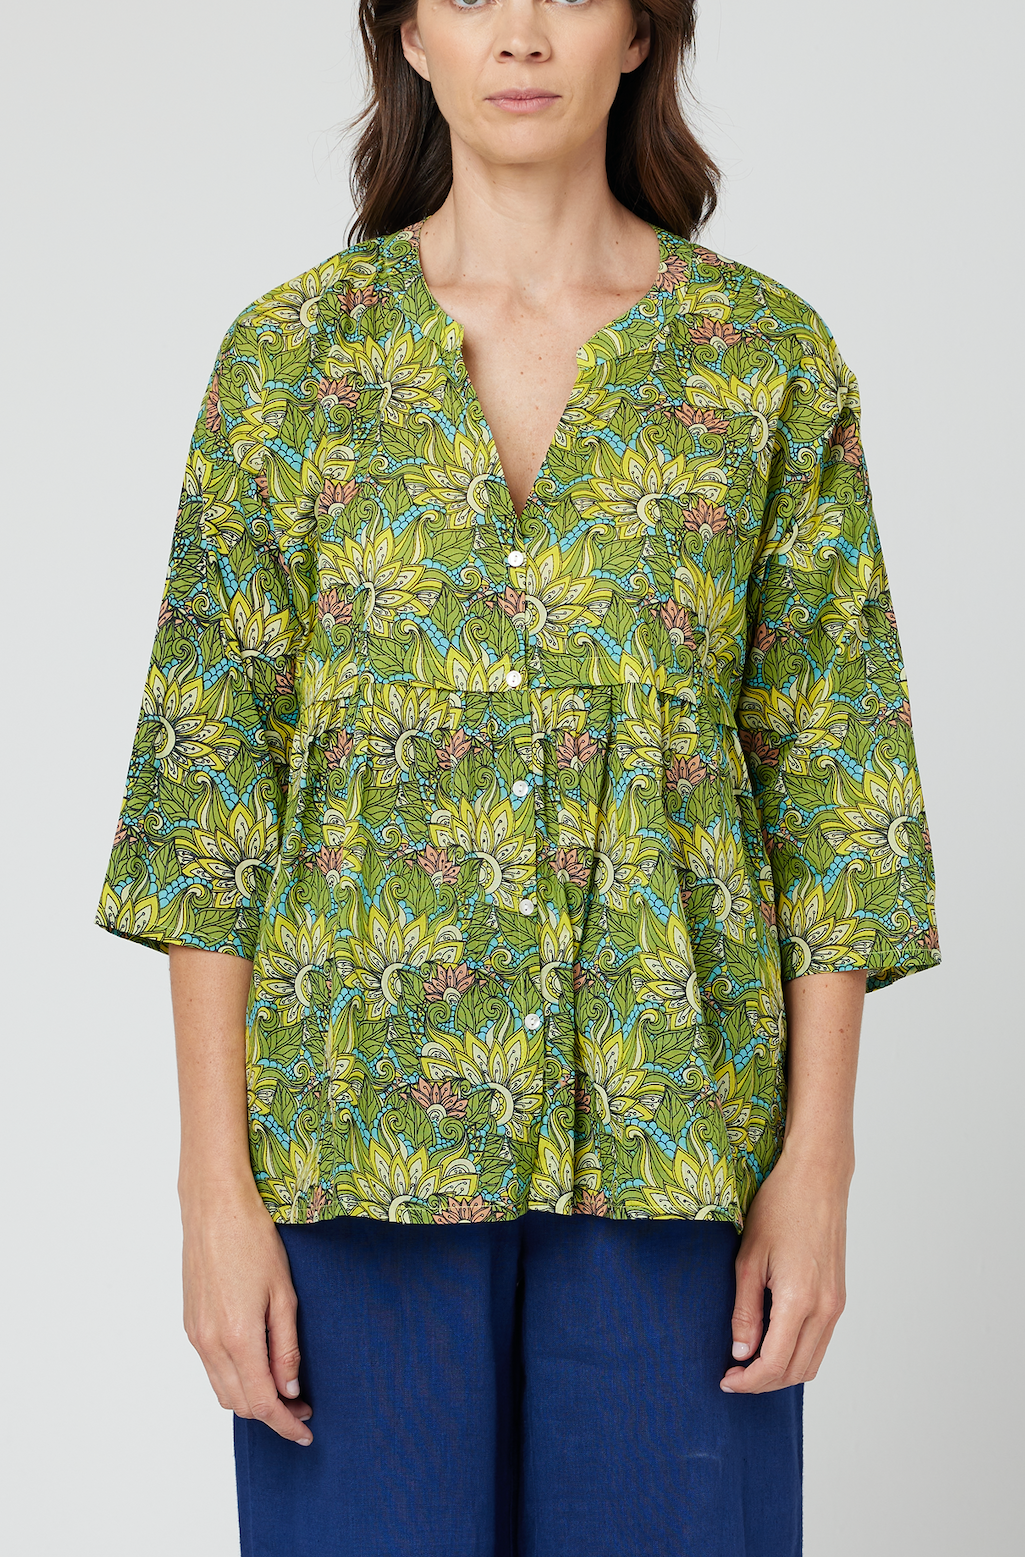 CAKE Button Through Blouse in Sunflower